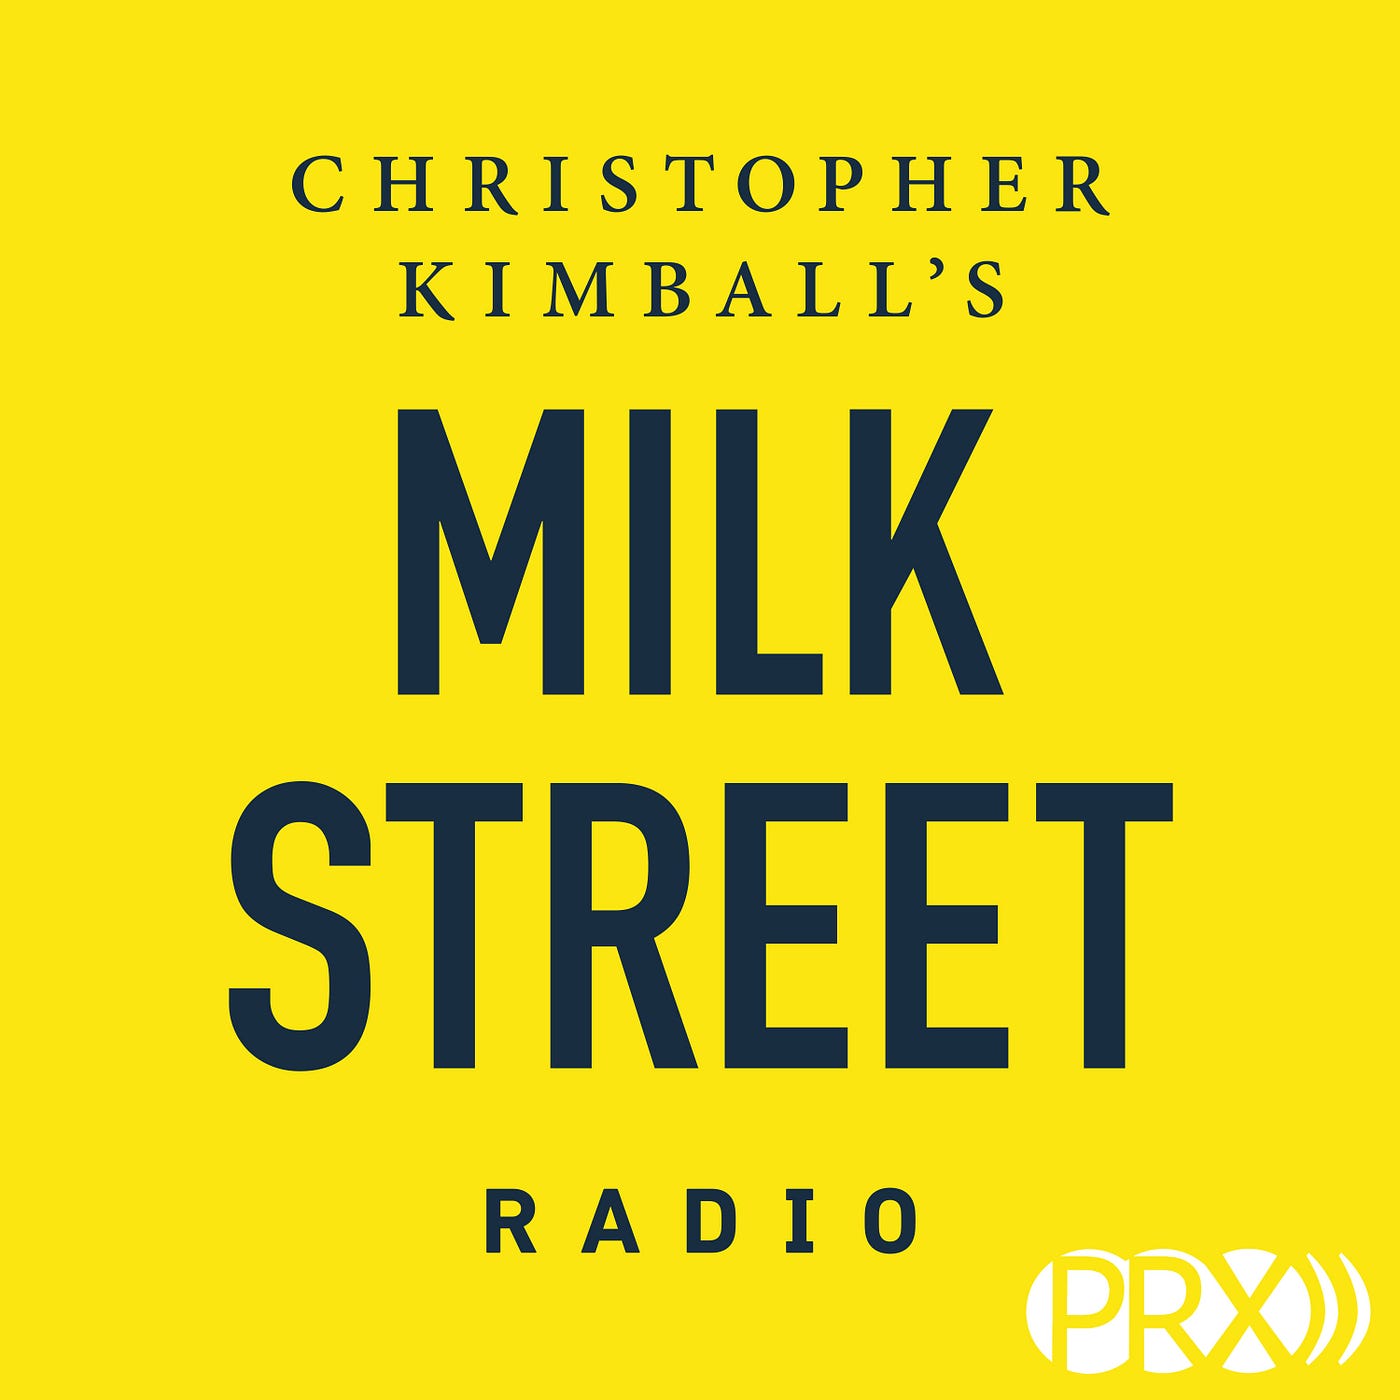 Virtually nothing can - Christopher Kimball's Milk Street